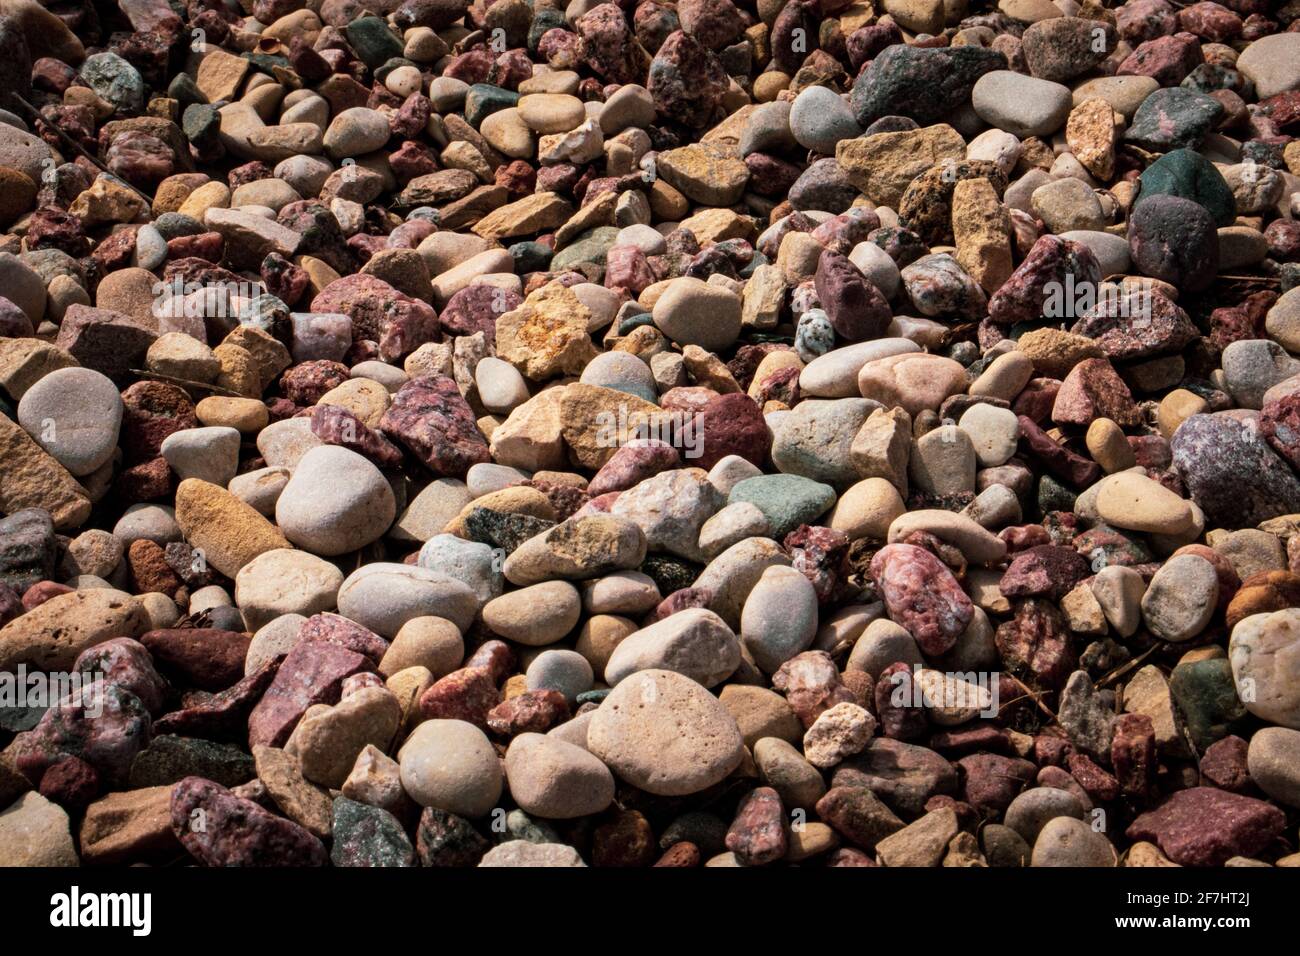 Colorful Stones, Spring-Time Sun, and A Walk In The Park Stock Photo